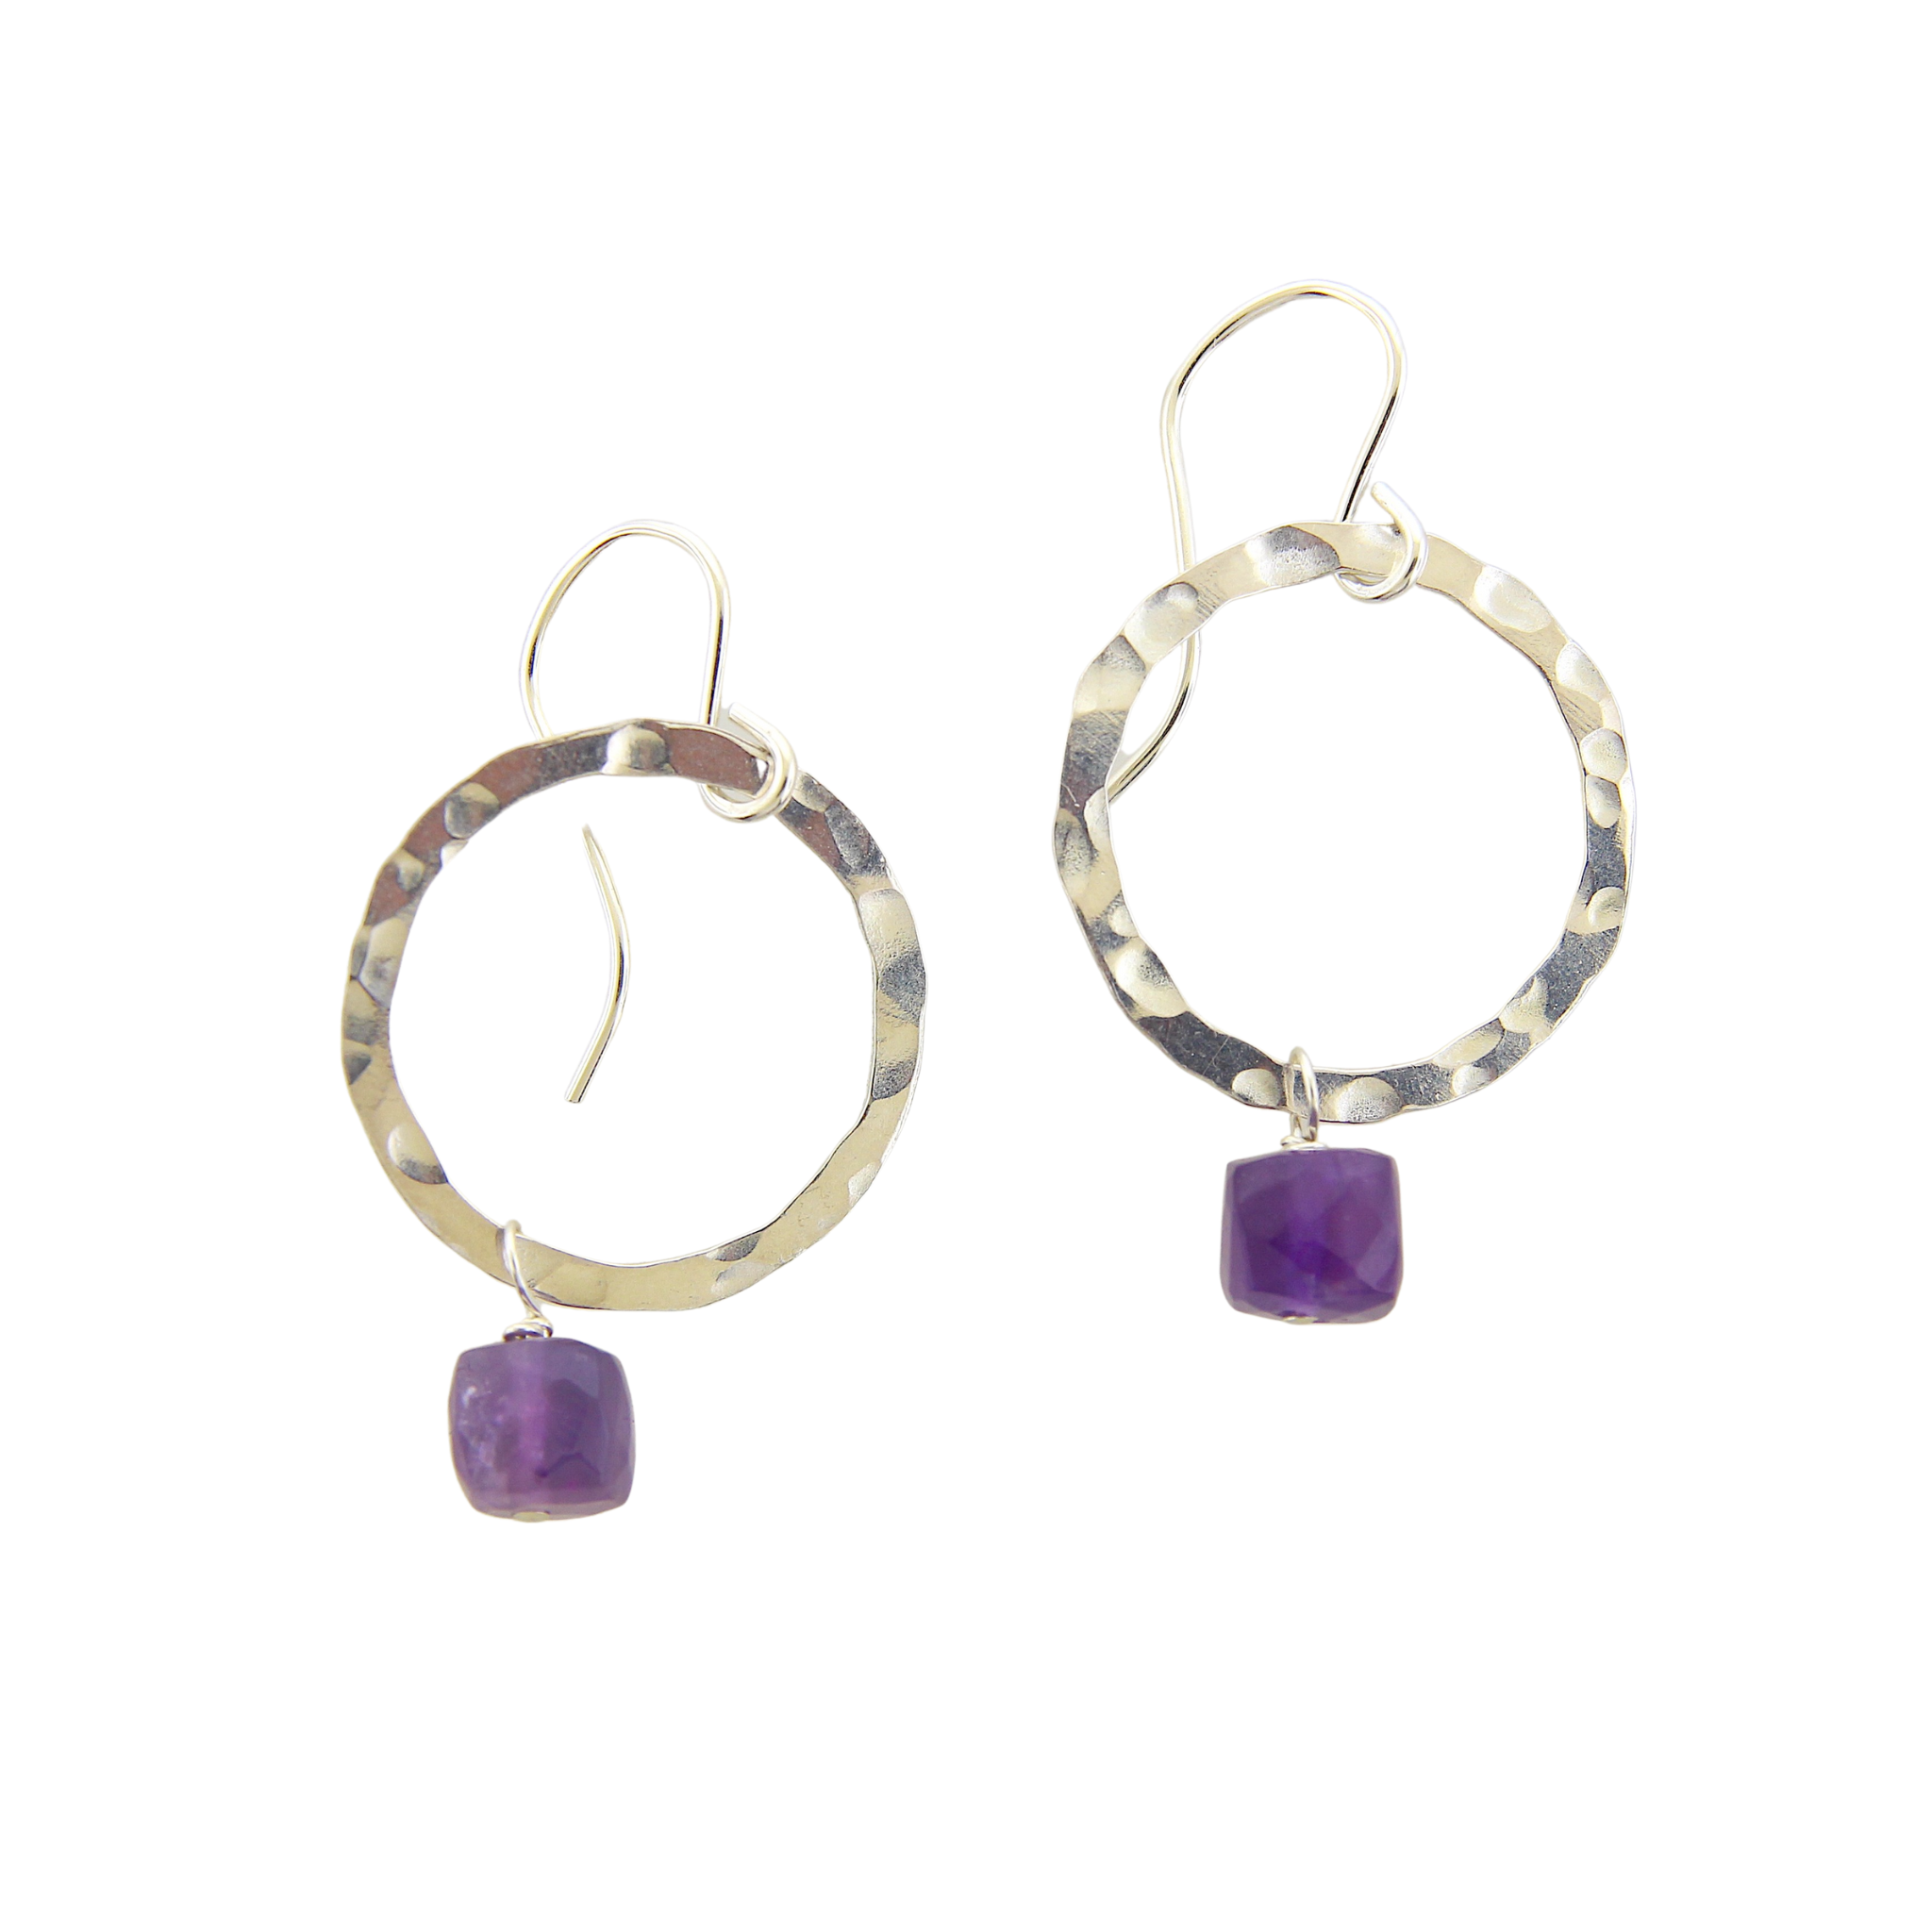 Hammered Silver Circle Earrings - Amethyst Small